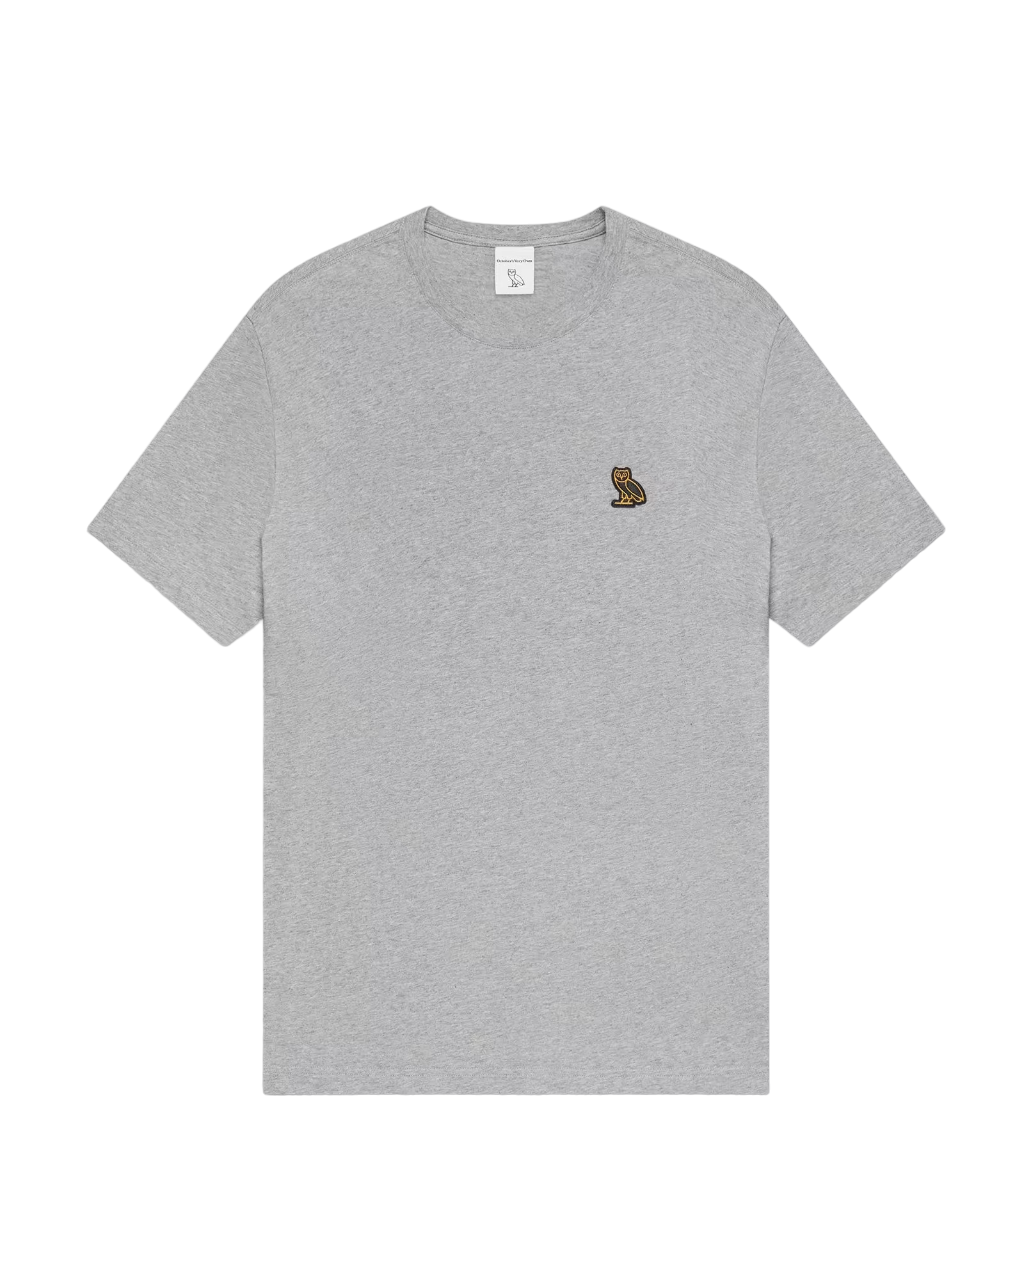 October's Very Own Classic T-Shirt - Heather Grey